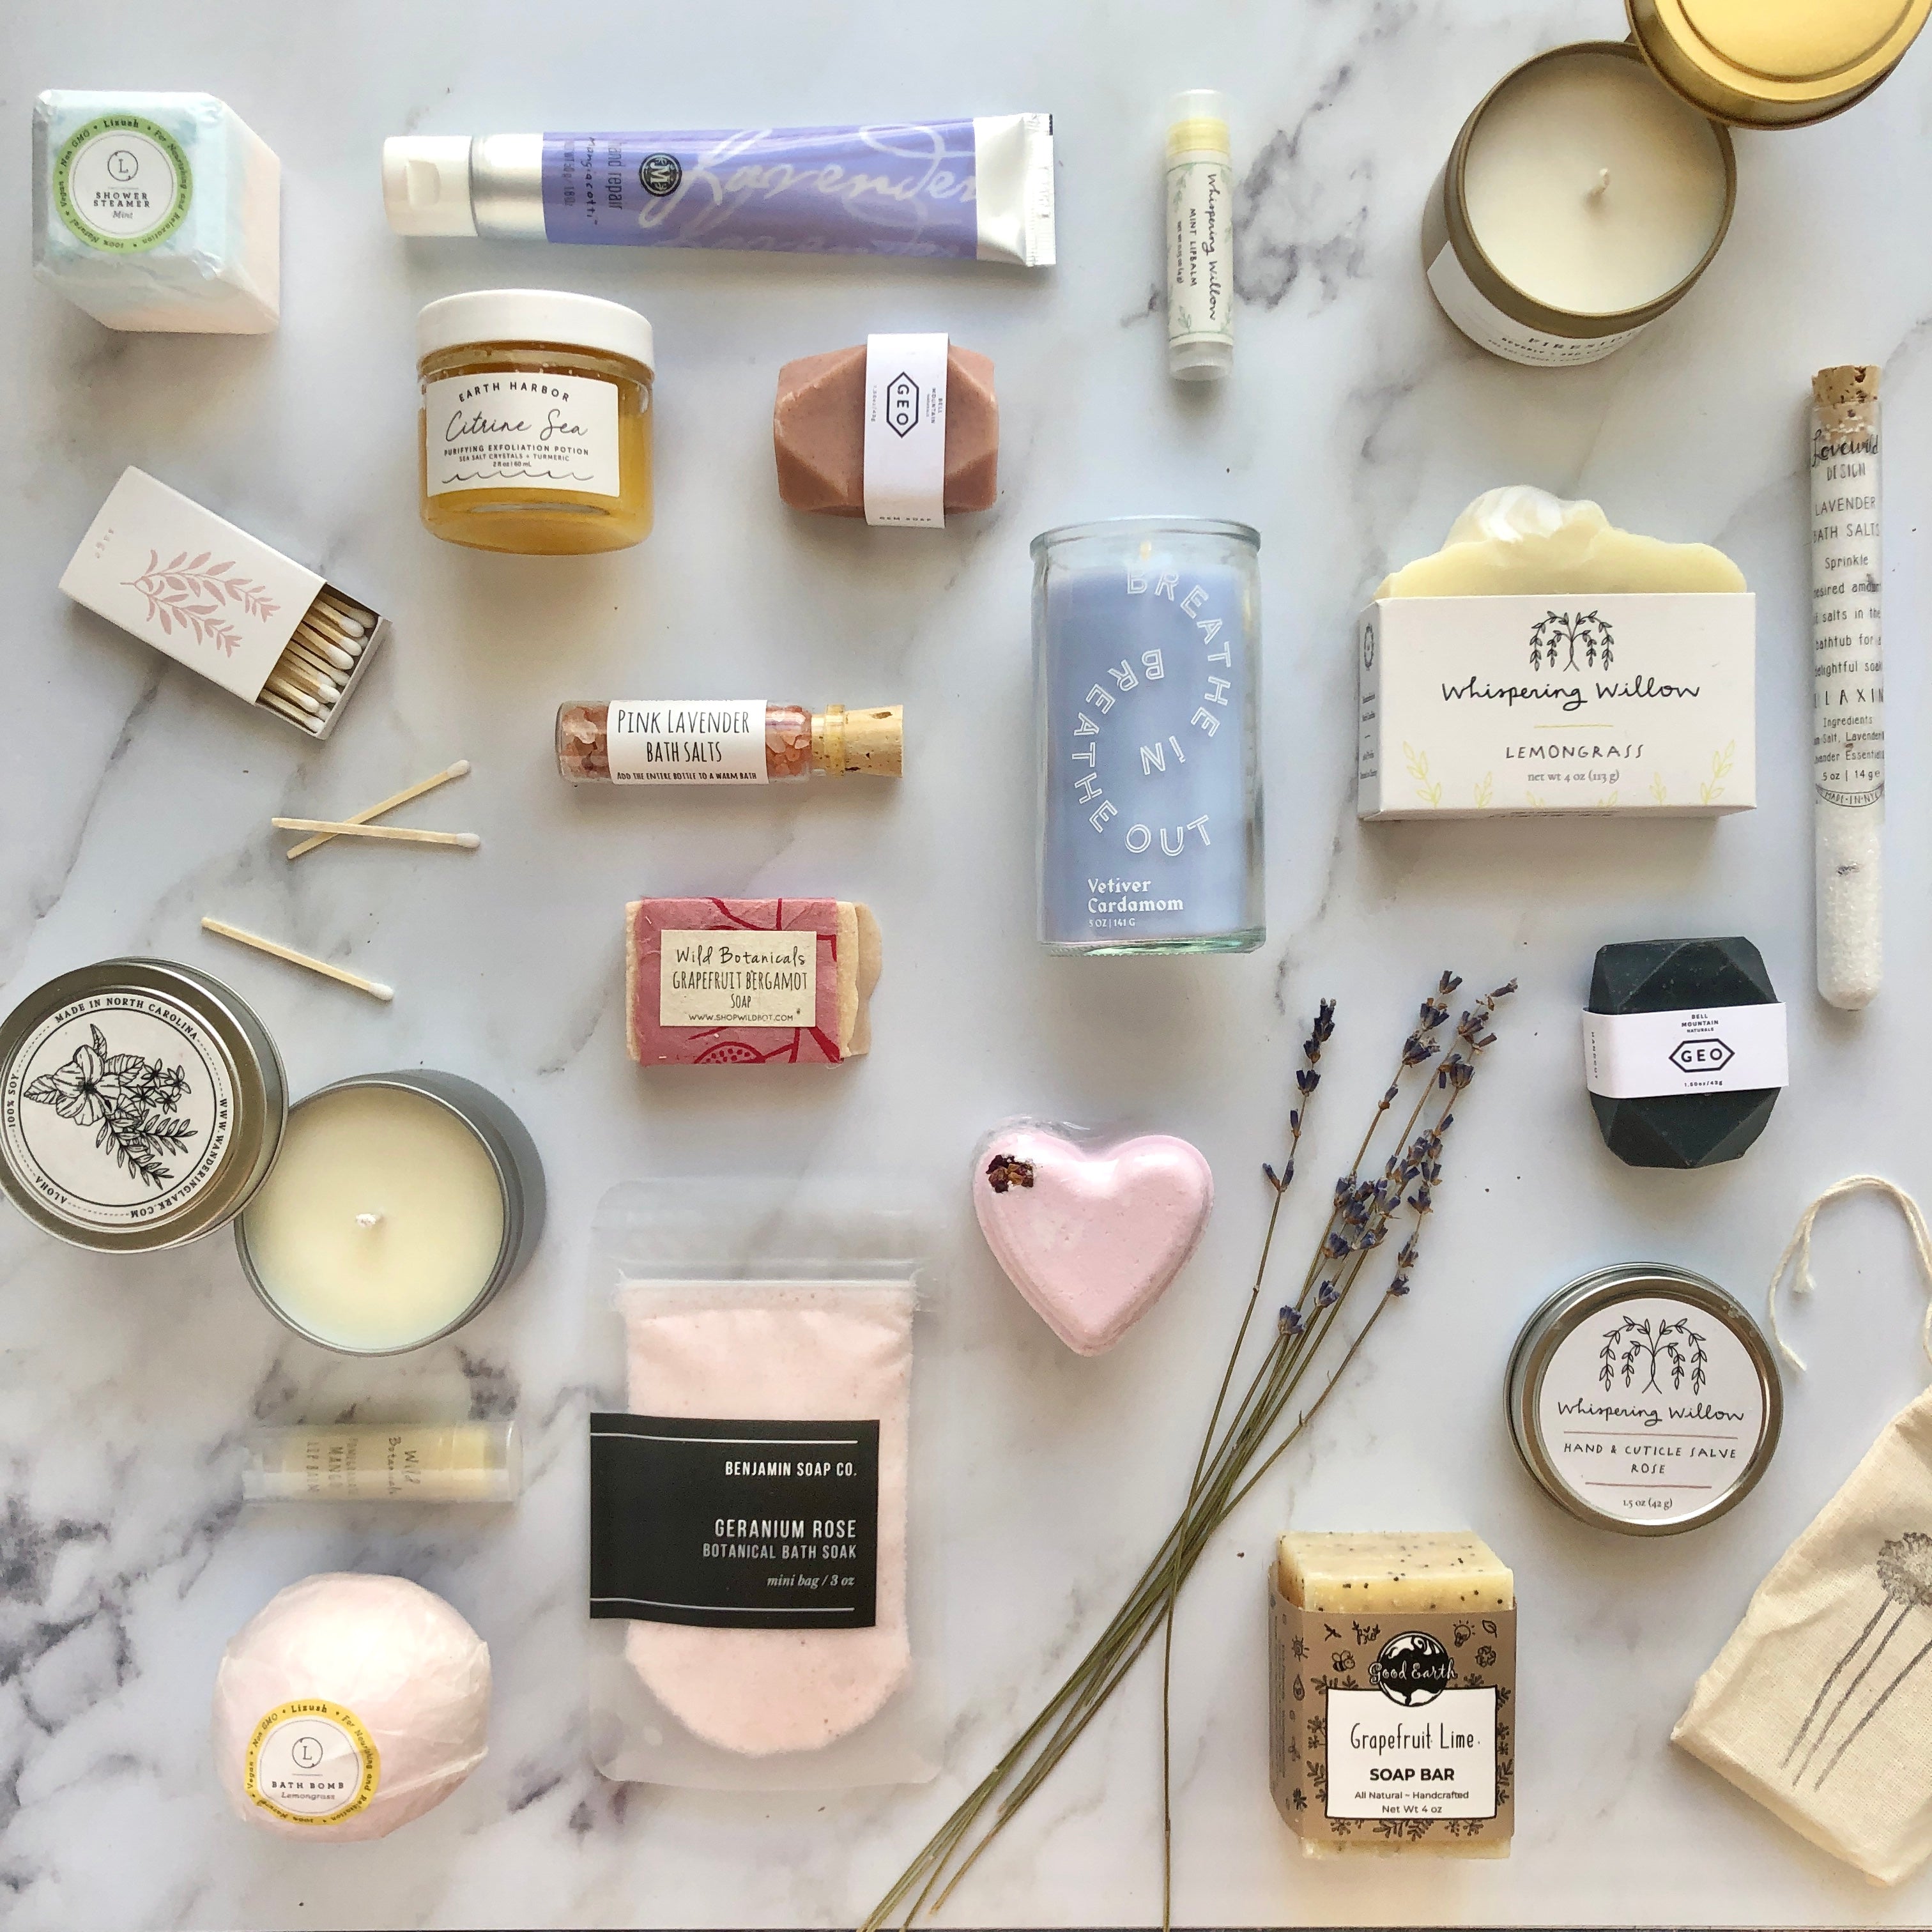 Cheap self-care products